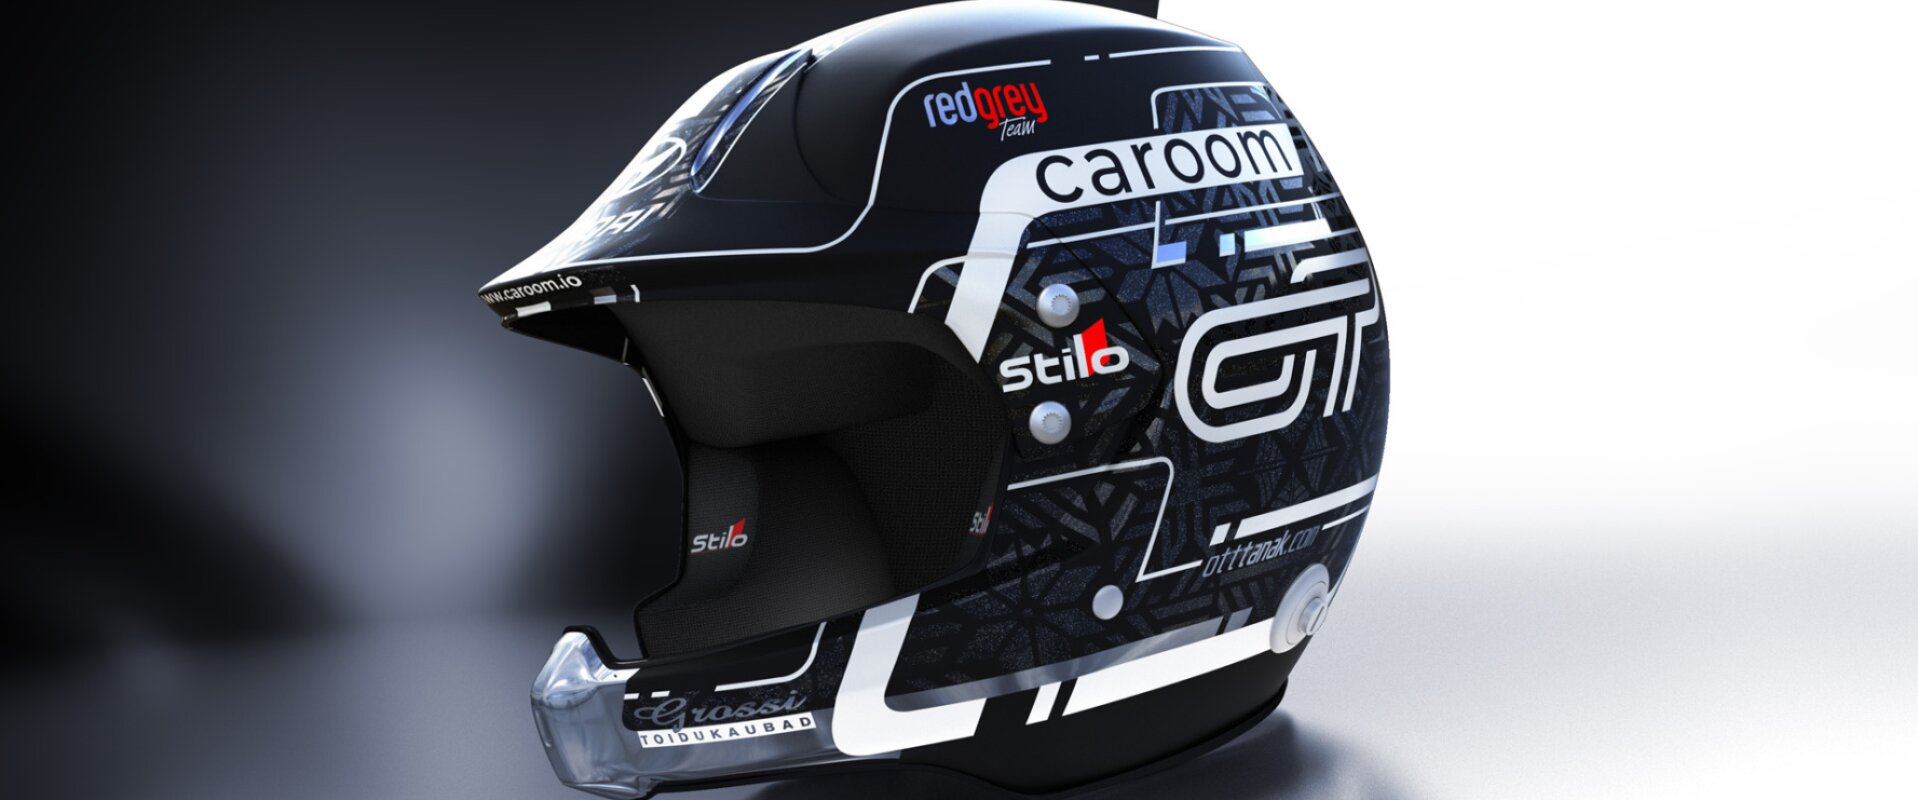 wrc helmet driver and co driver design in black and super chrome